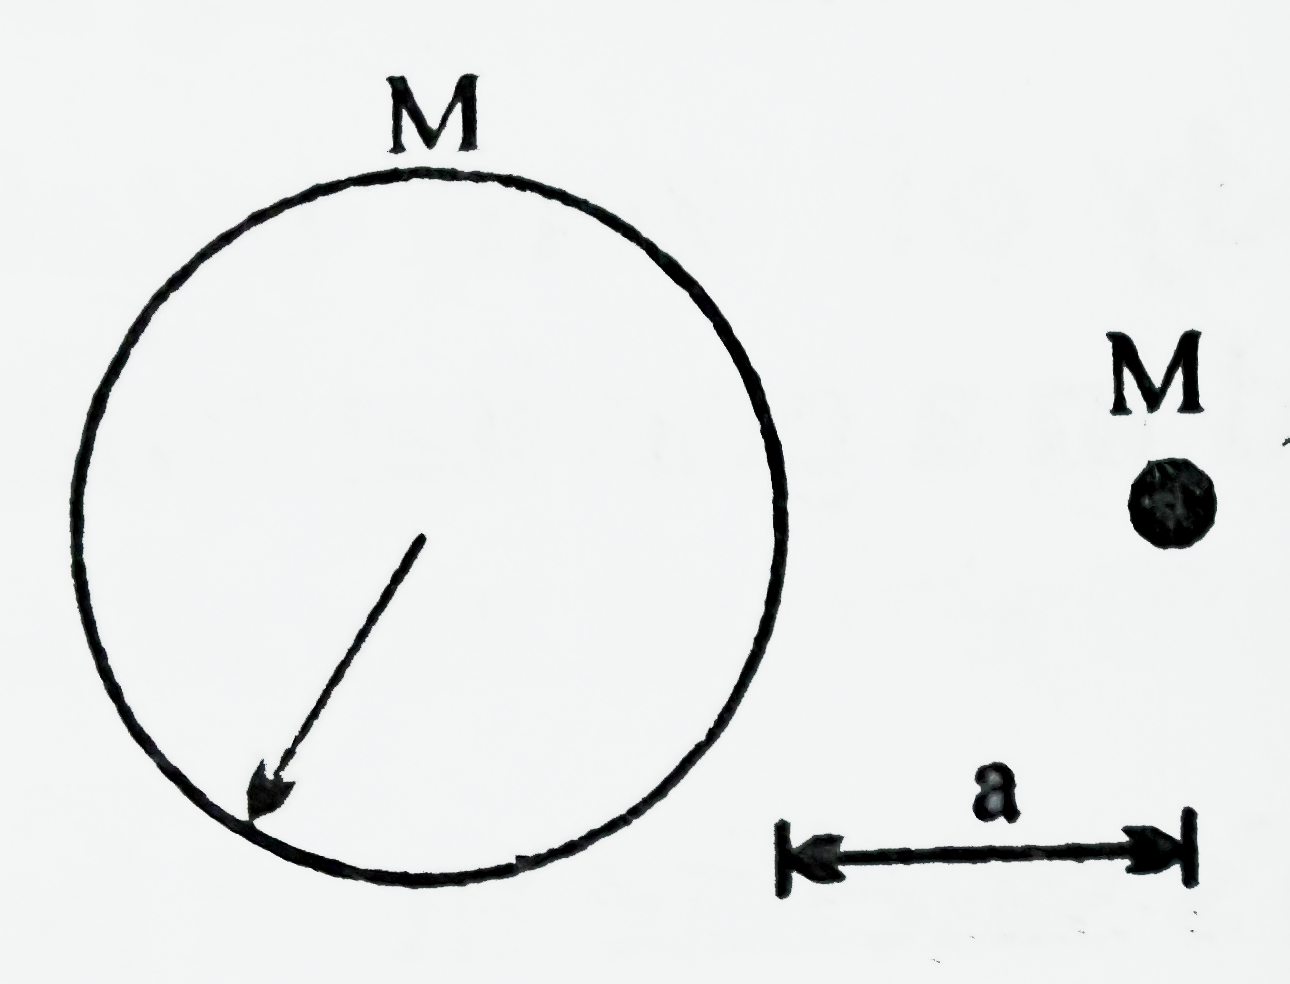 A particle of mass M is at a distance a from surface of a thin spherical shell of equal mass and having radius a.